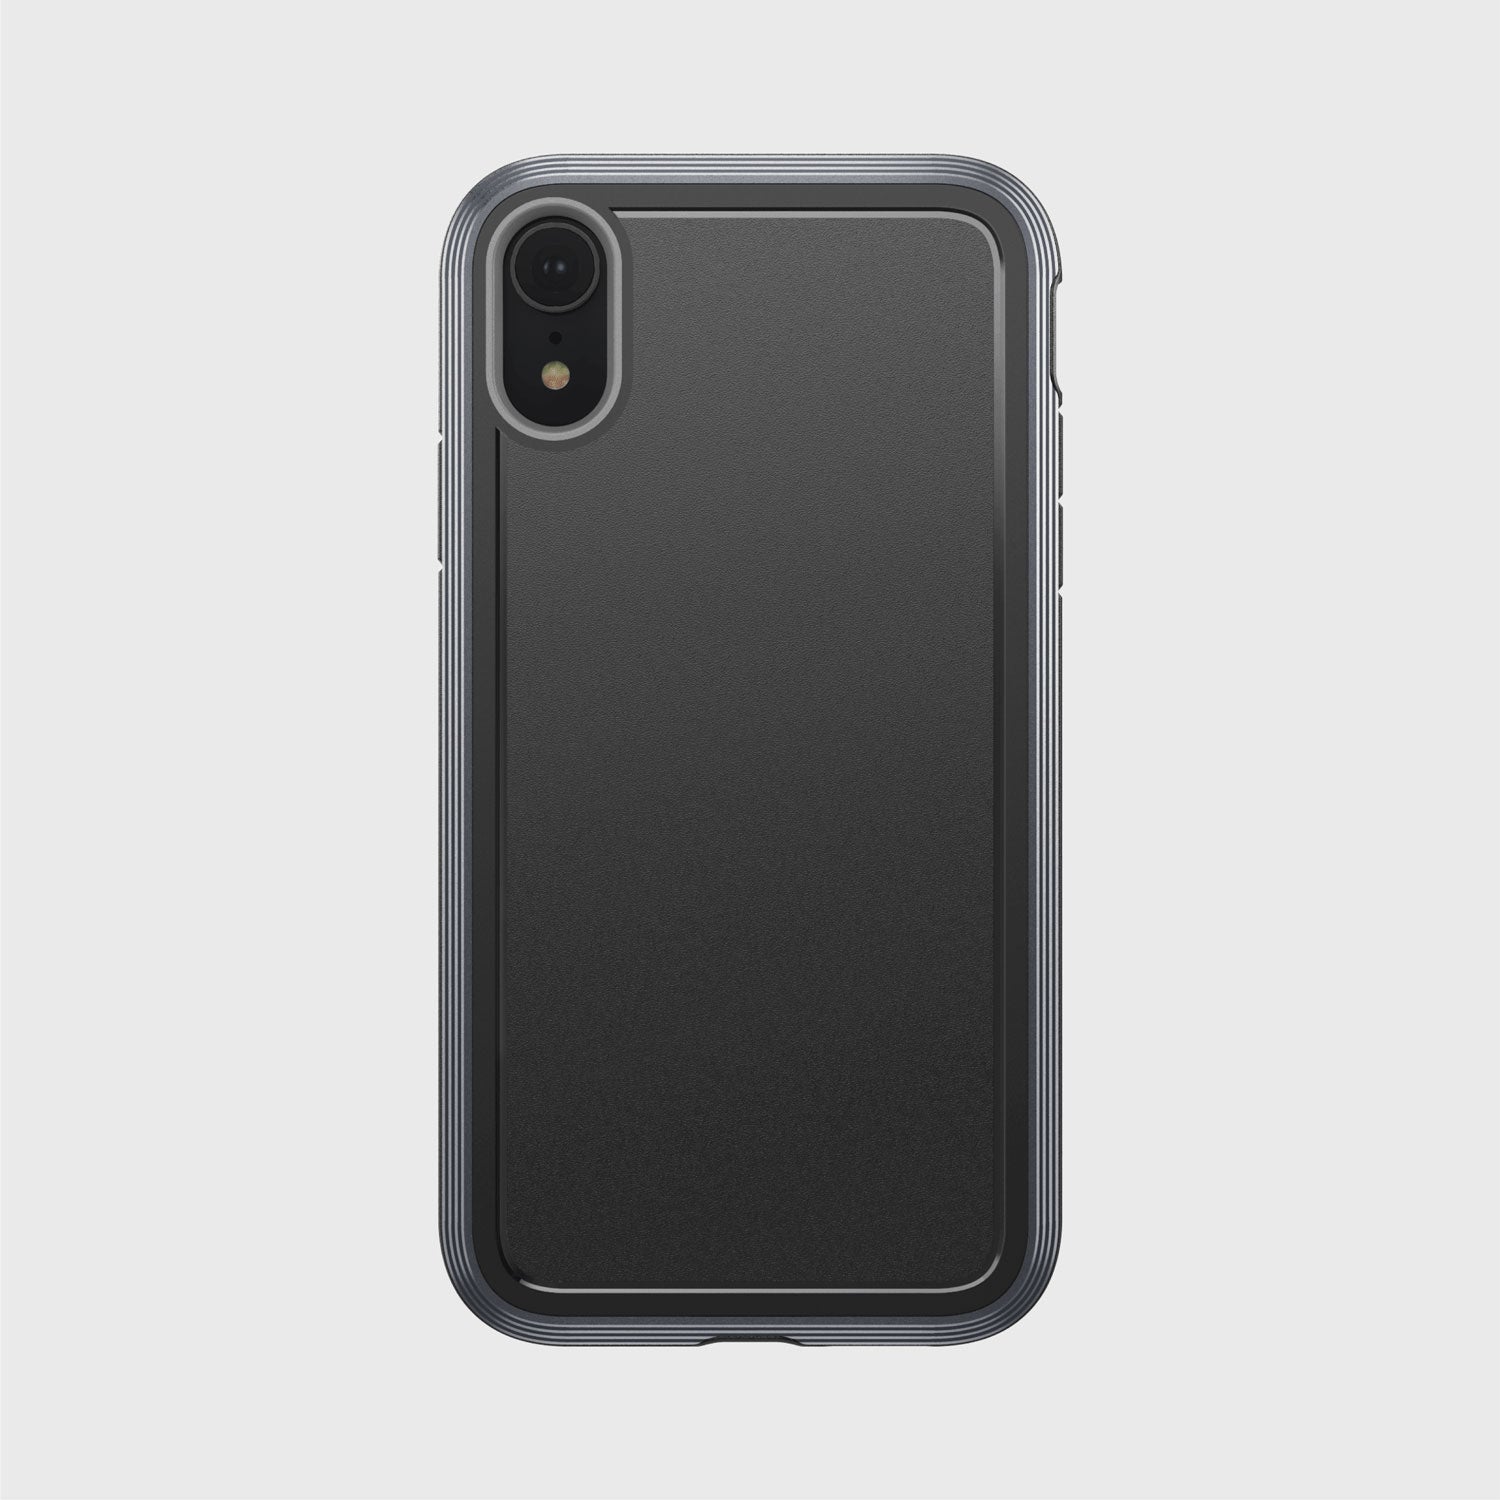 A black ULTRA iPhone XR case providing device protection on a white background by Raptic.